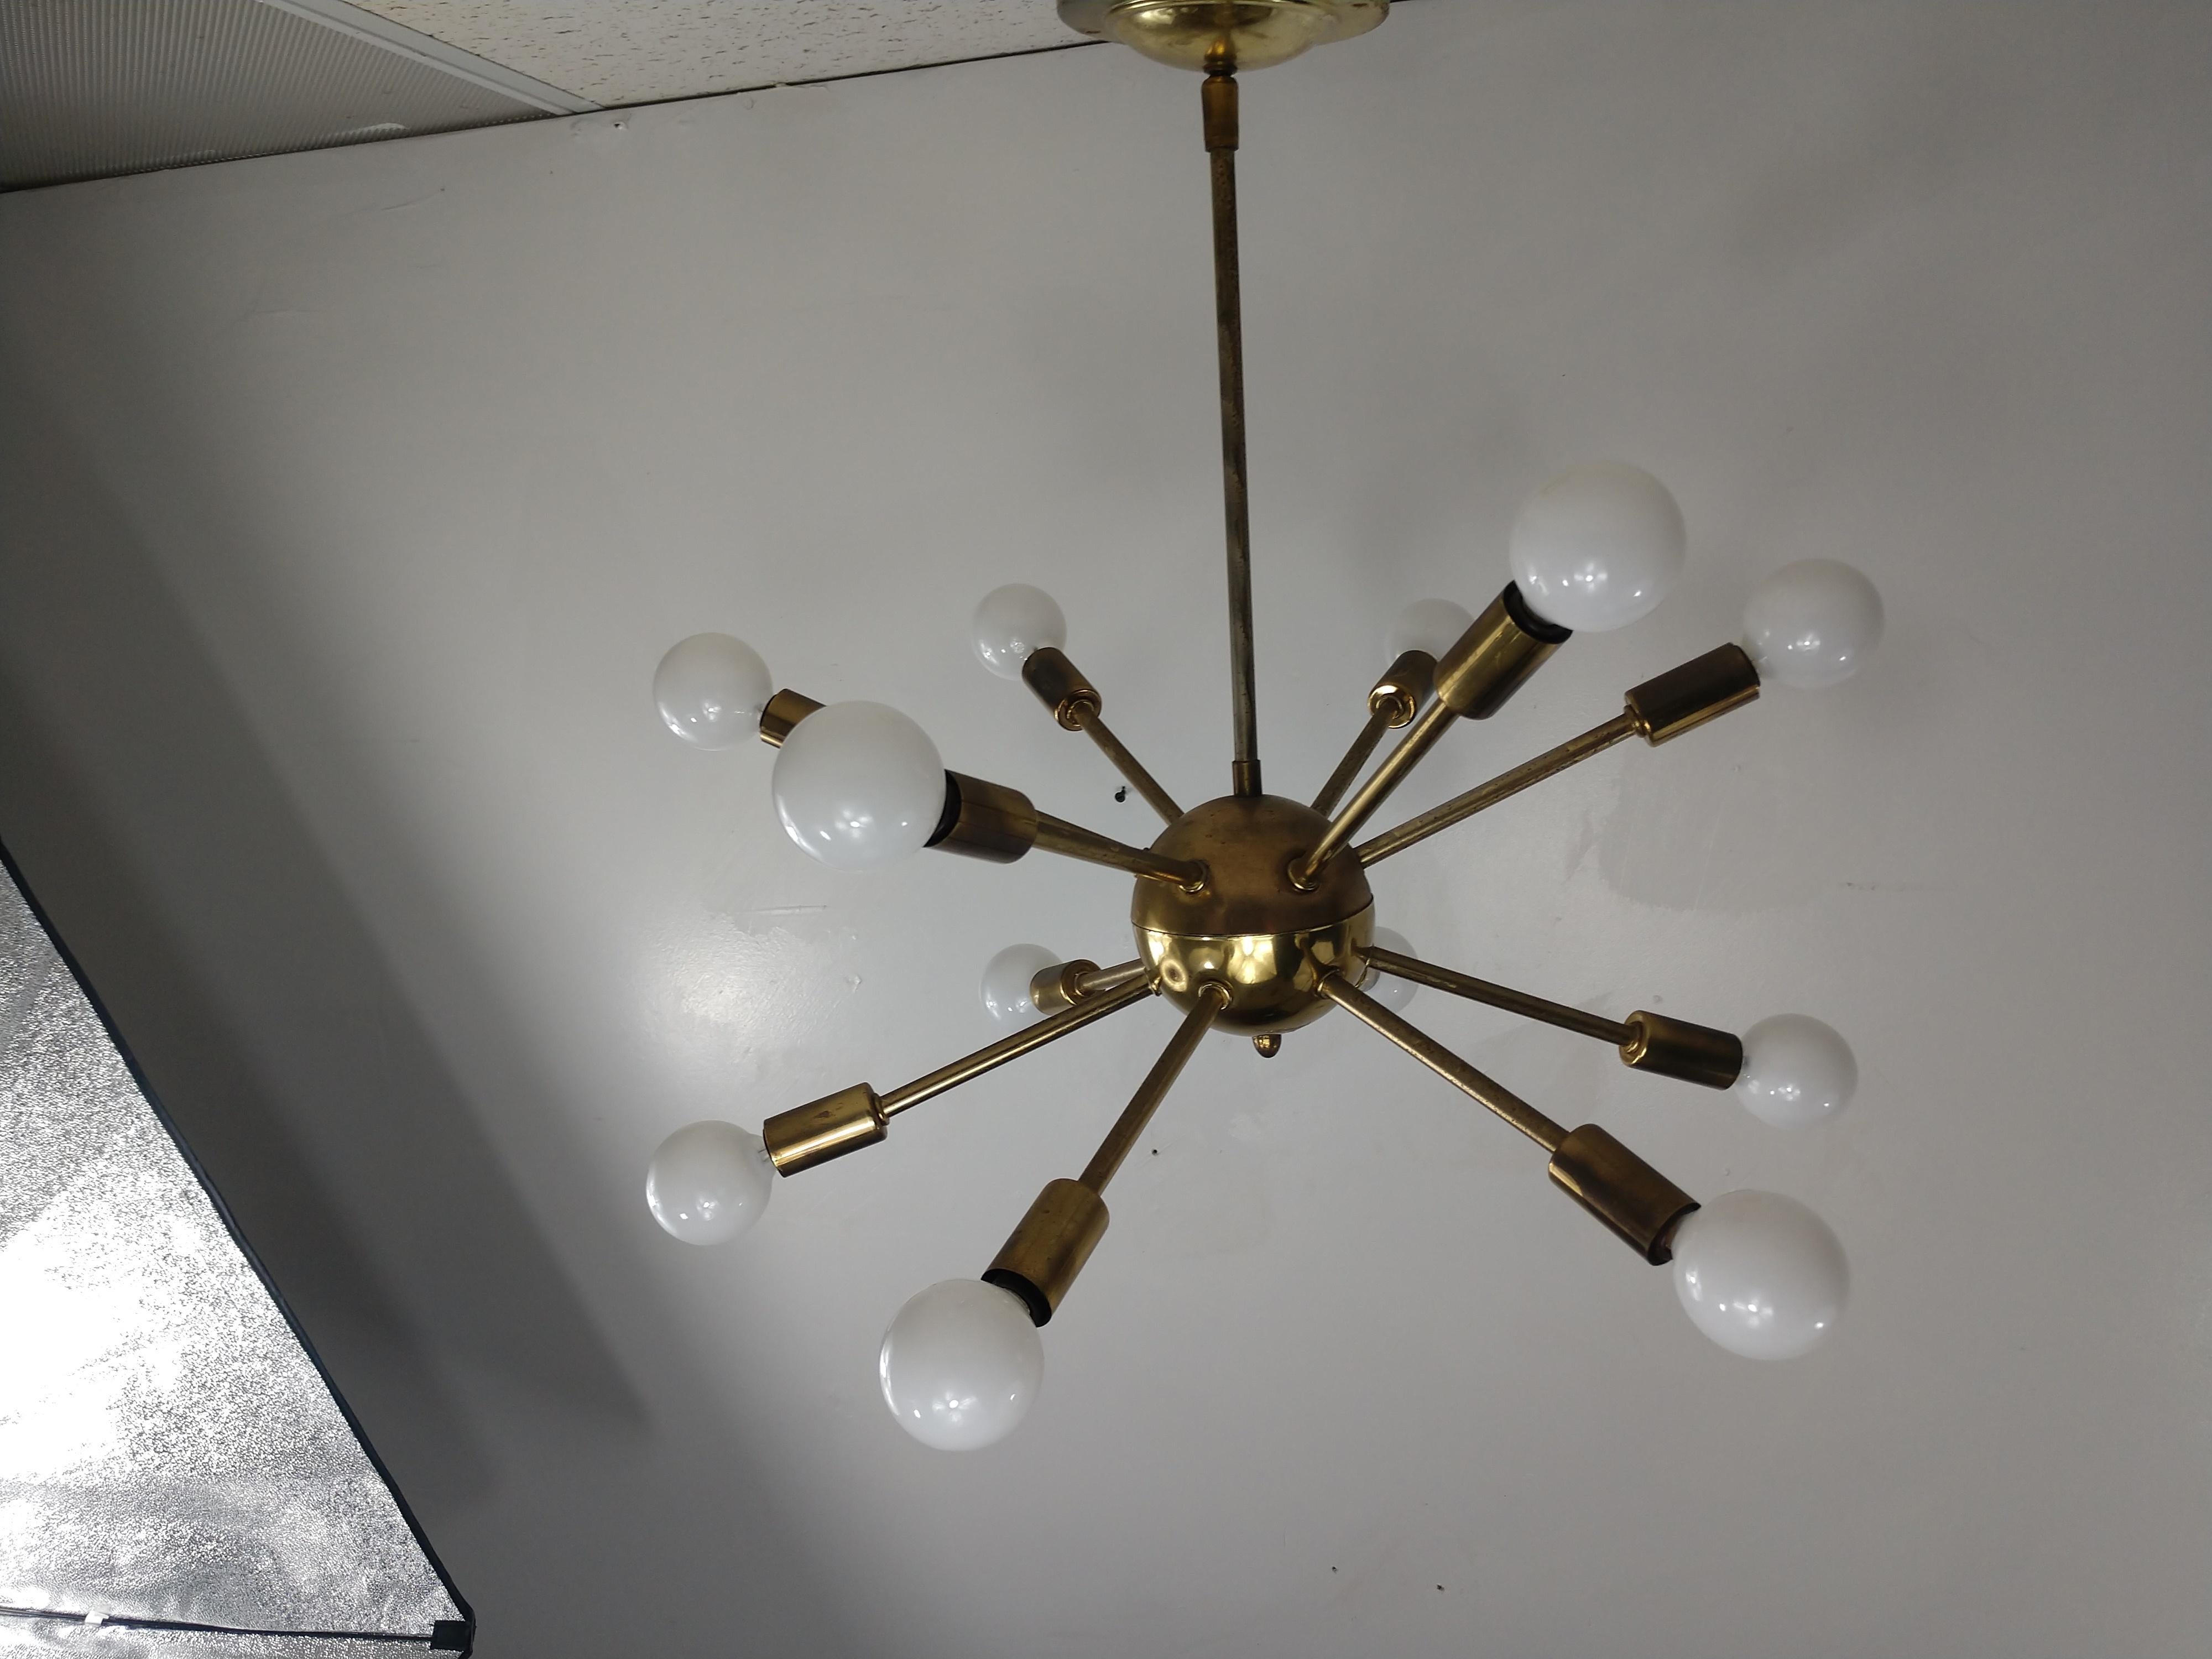 Original Sputnik chandelier from the mid-1950s with 12-light for illumination. All brass with some minor tarnish, age related. Wiring is crisp and sound, has the original adjustable ceiling canopy. This item can be parcel posted.